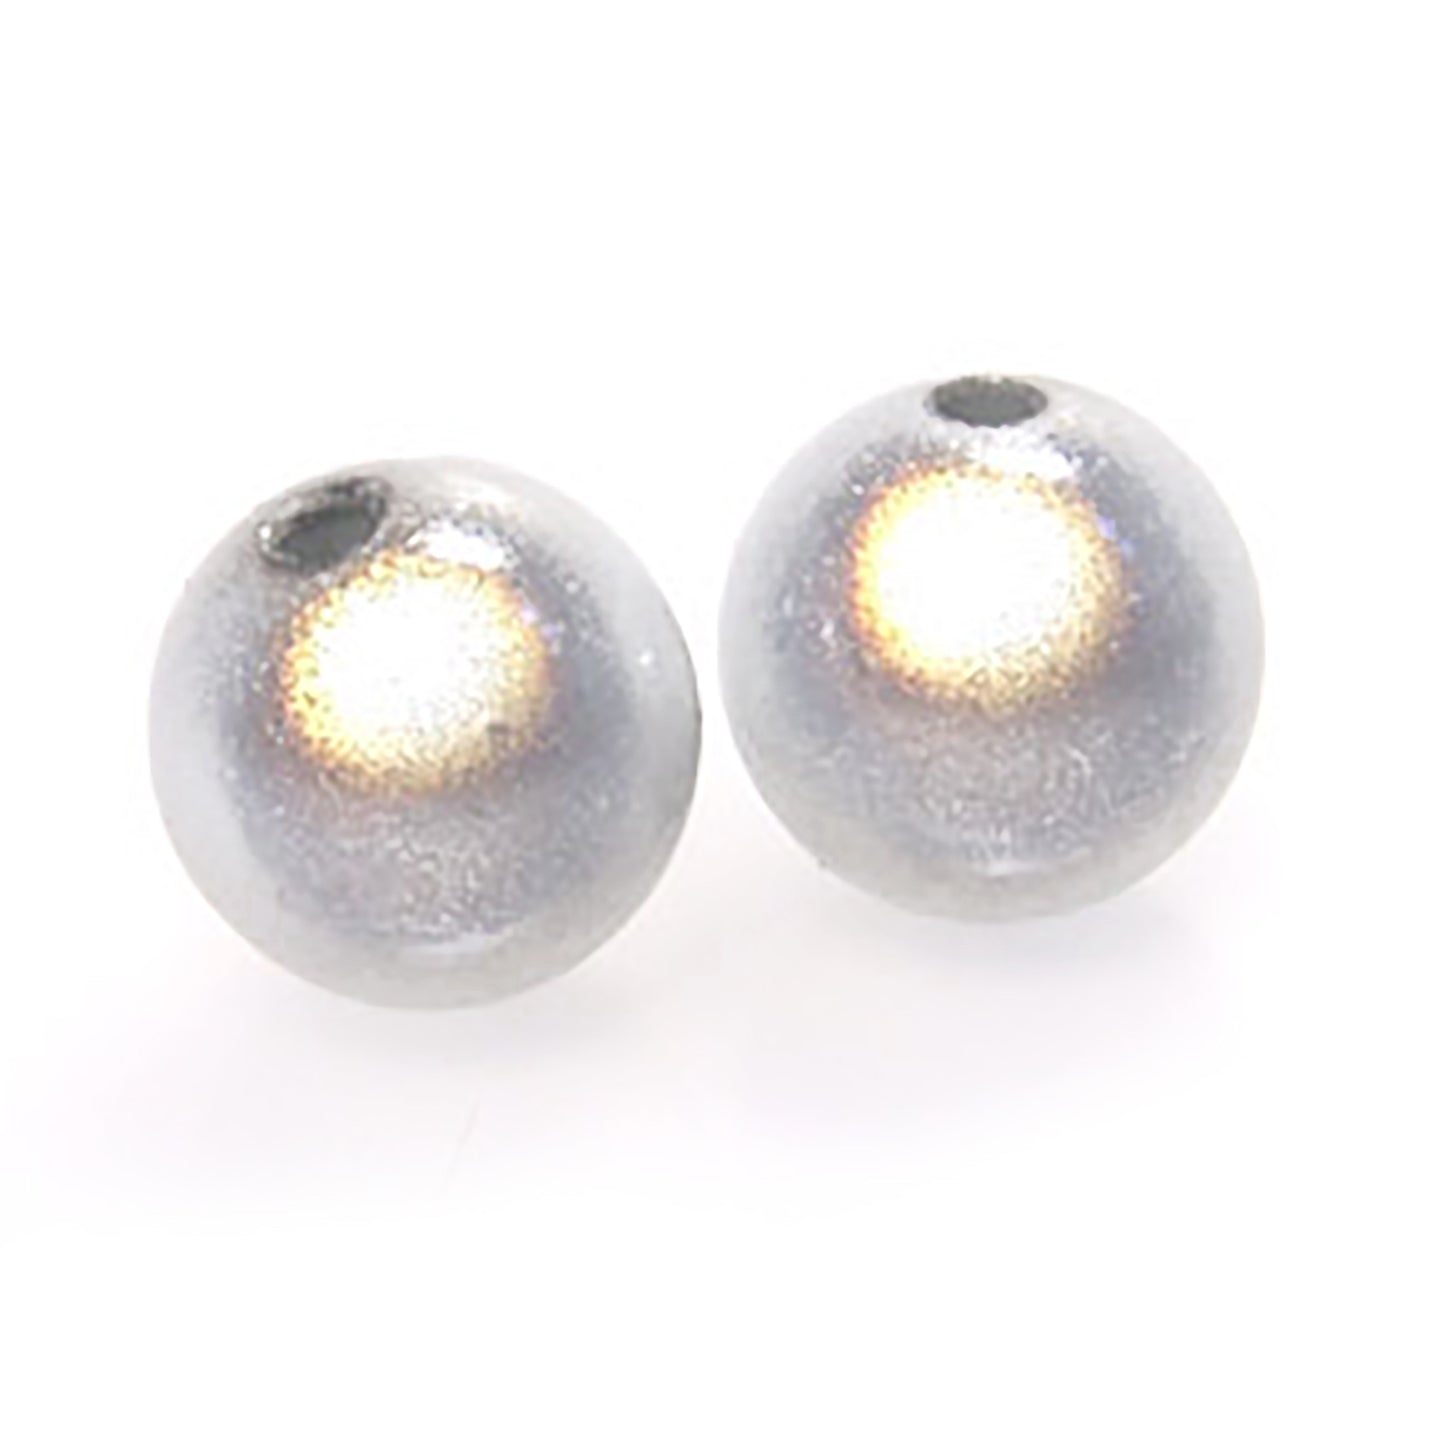 Miracle bead / white / 12 mm